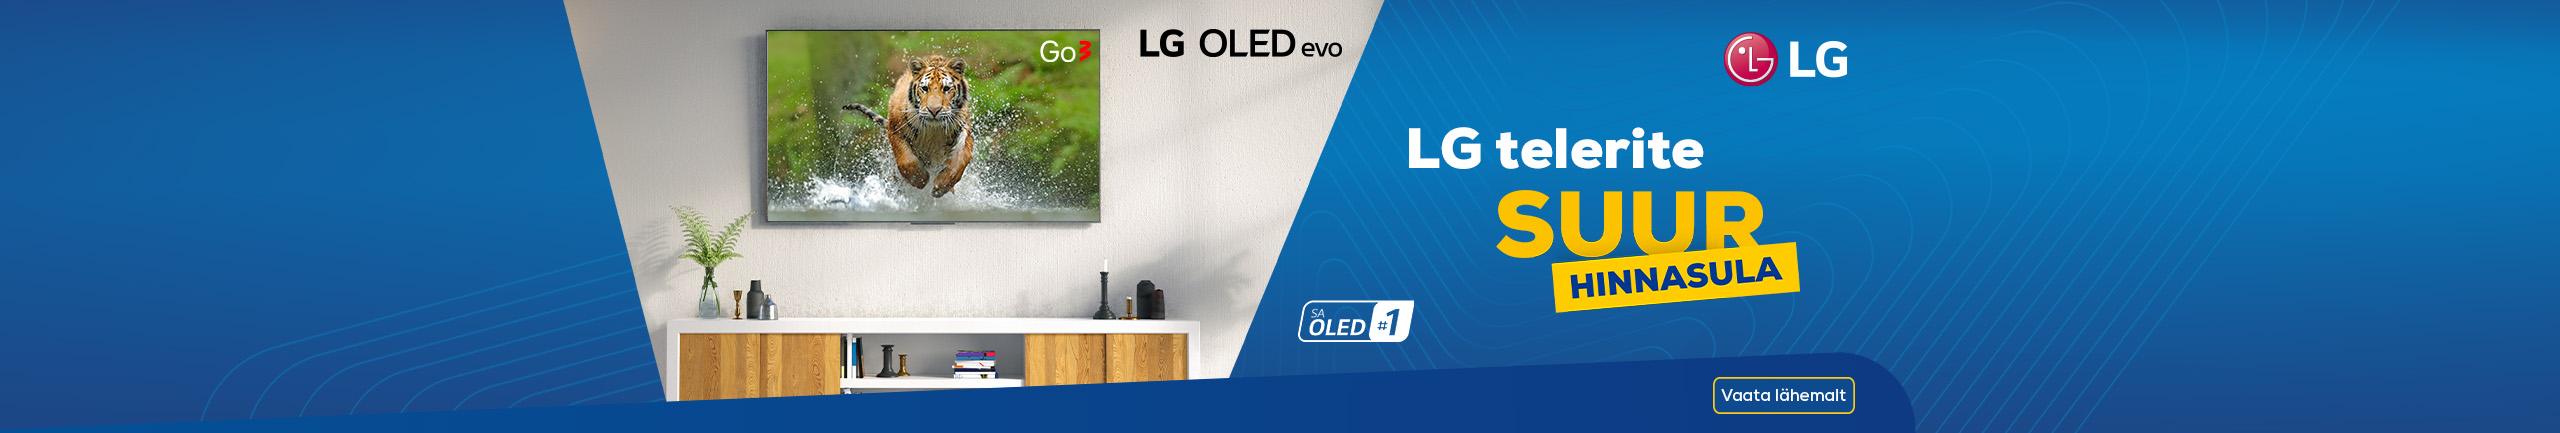 Sale for LG TV-s!